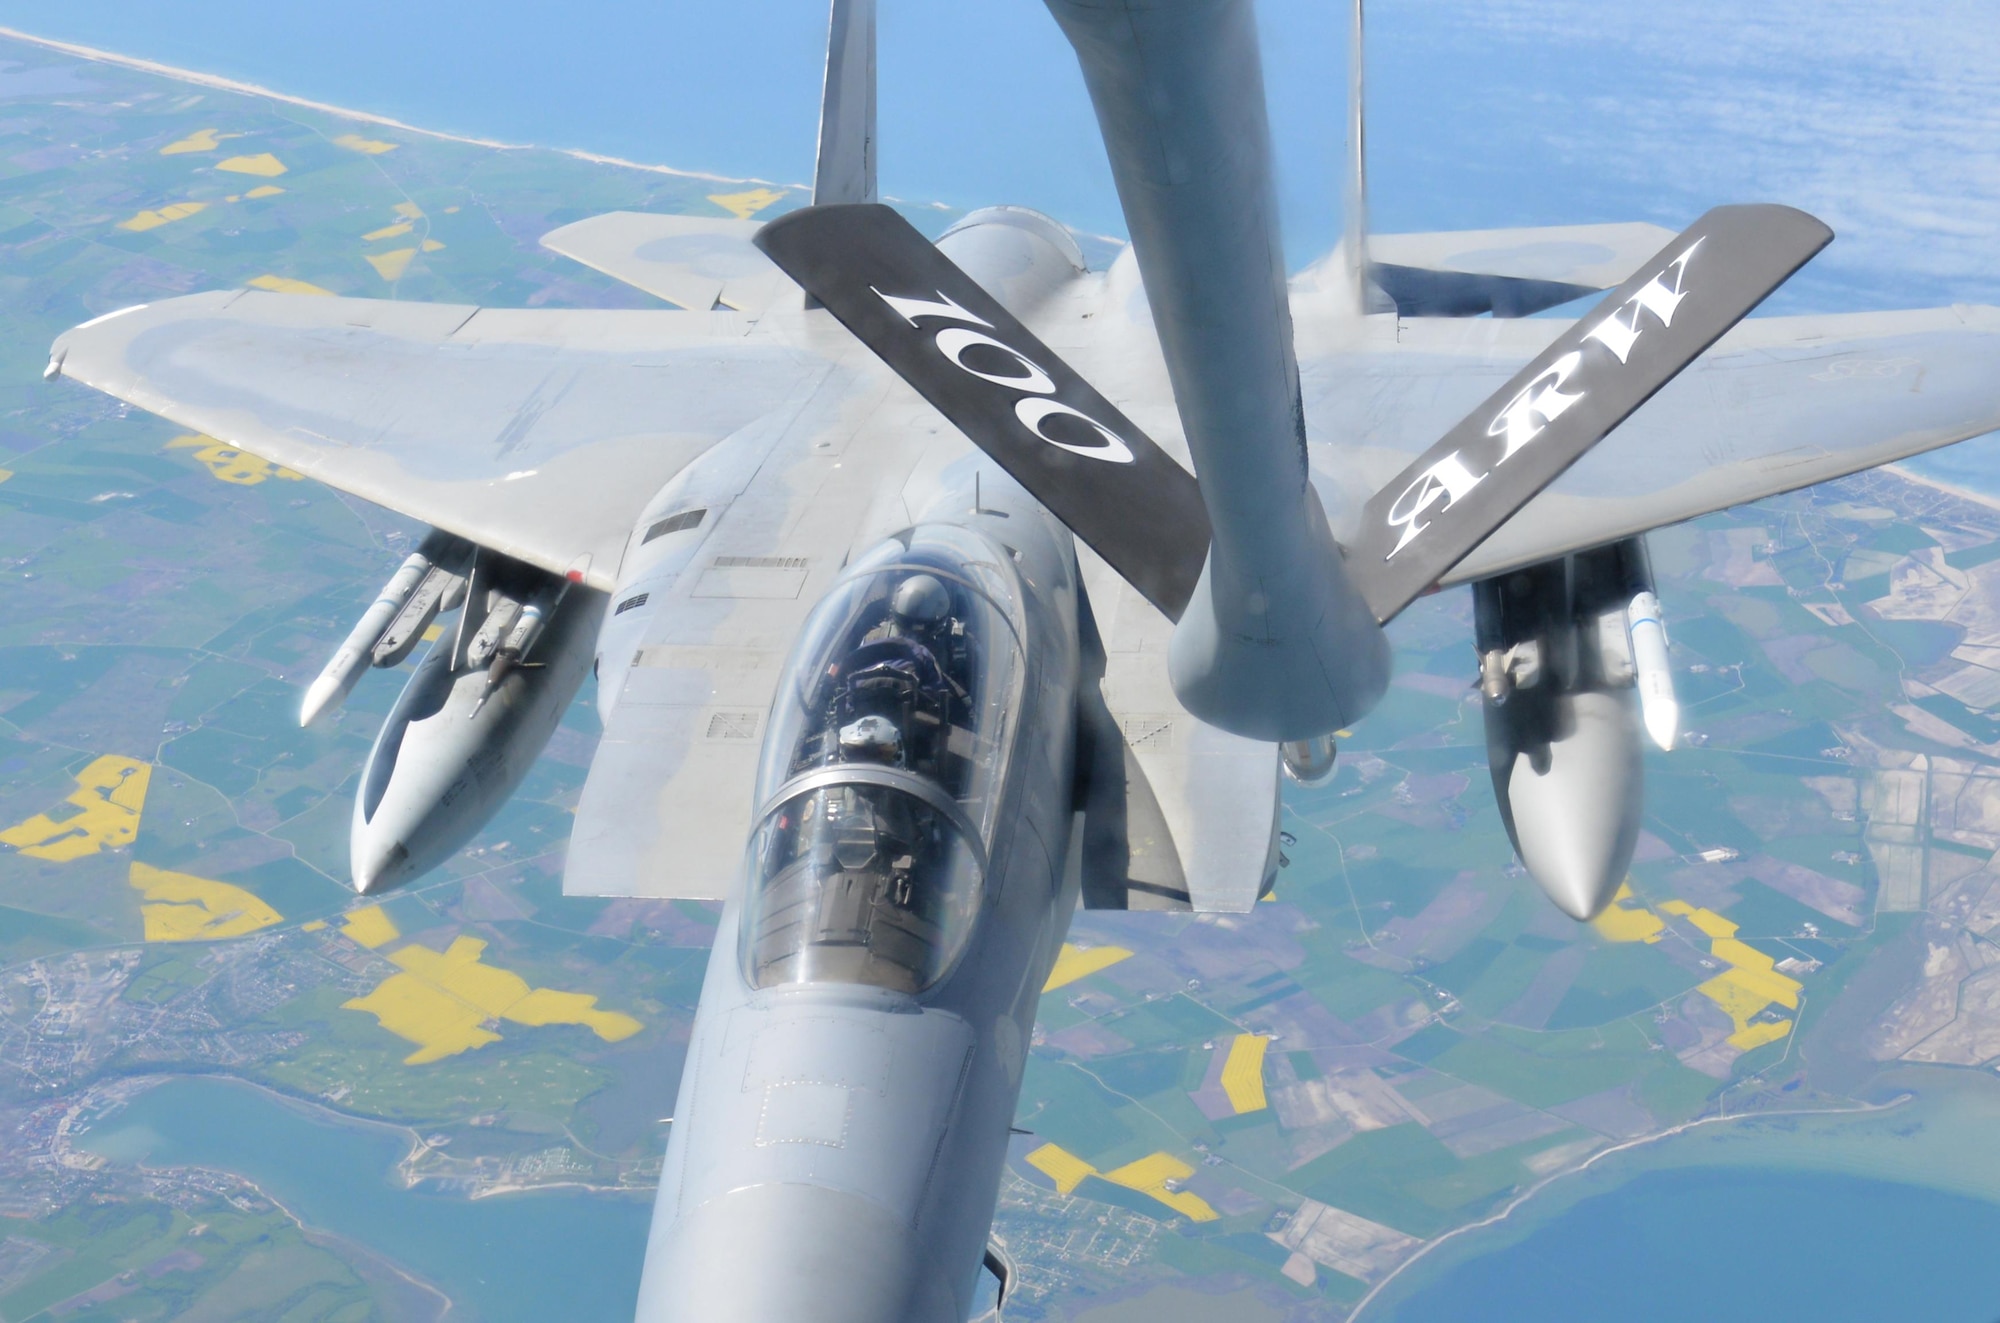 An F-15E Strike Eagle from RAF Lakenheath, England, receives fuel from a KC-135 Stratotanker, May 19, 2017. The KC-135 is assigned to RAF Mildenhall, England. Both aircraft are on their way to support Arctic Challenge 2017, a multinational exercise encompassing 11 nations and more than 100 aircraft. Air Force photo by Tech. Sgt. David Dobrydney